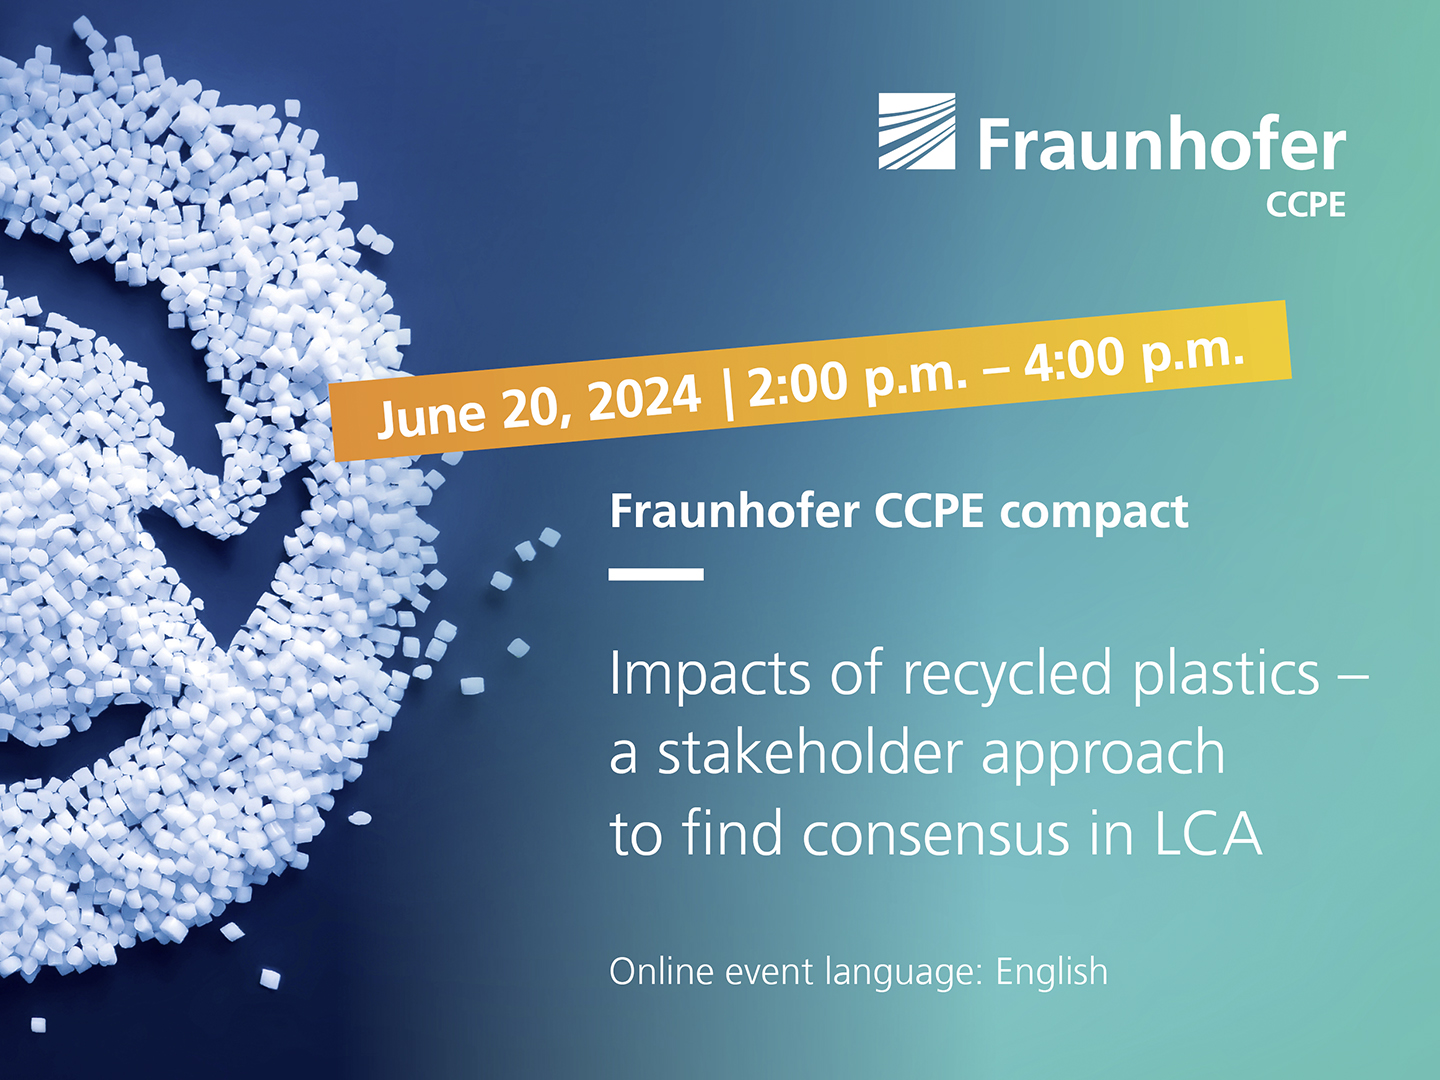 Fraunhofer CCPE compact "Impacts of recycled plastics –  A stakeholder approach to find consensus in LCA"